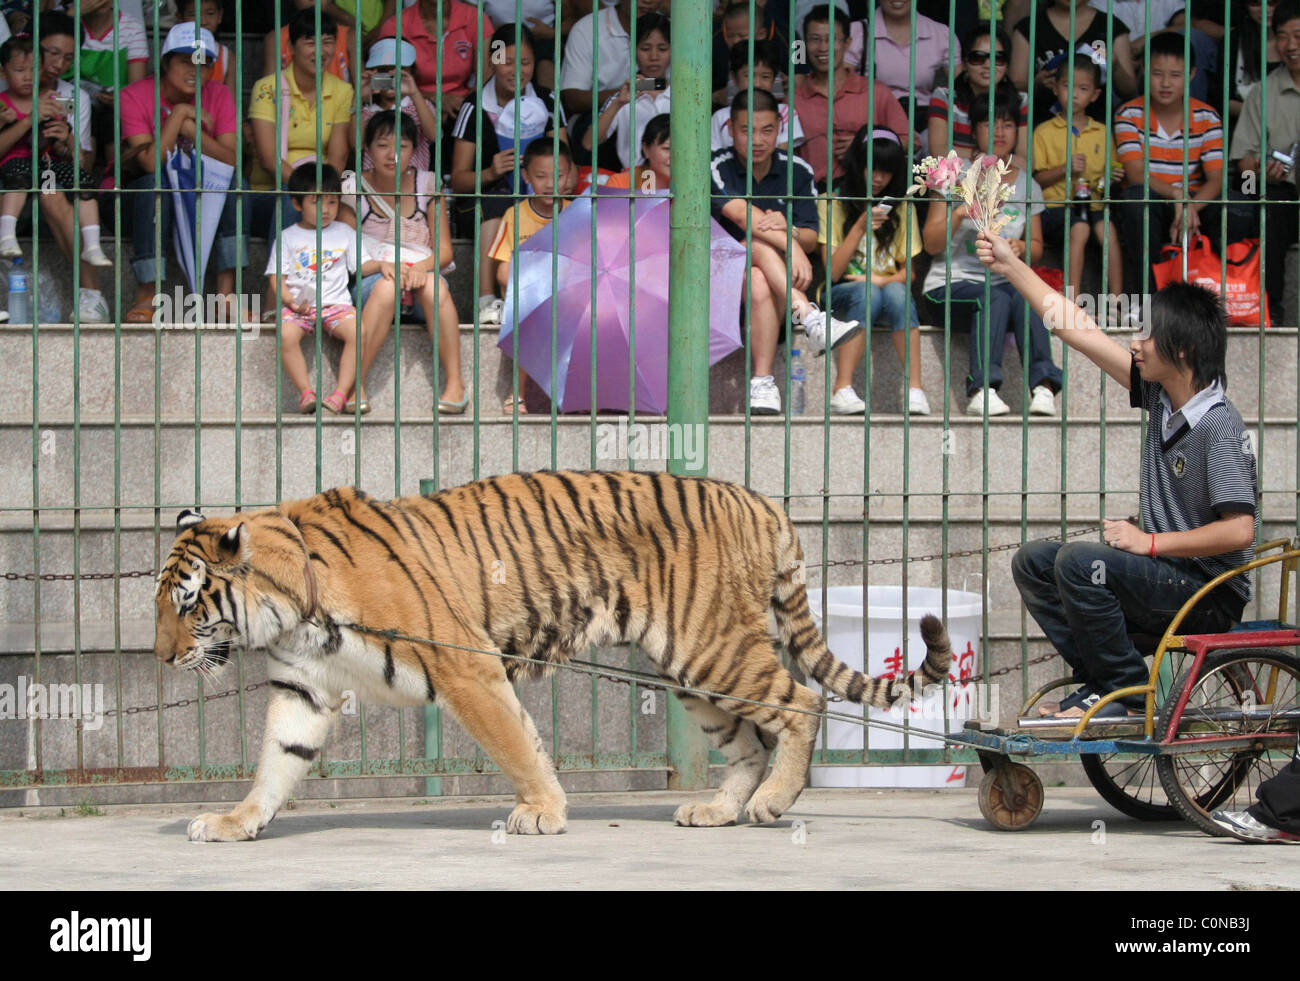 ANIMAL MAGIC These performing beasts wowed the crowds at a circus in China  with a series of amazing feats. Amazed onlookers saw Stock Photo - Alamy